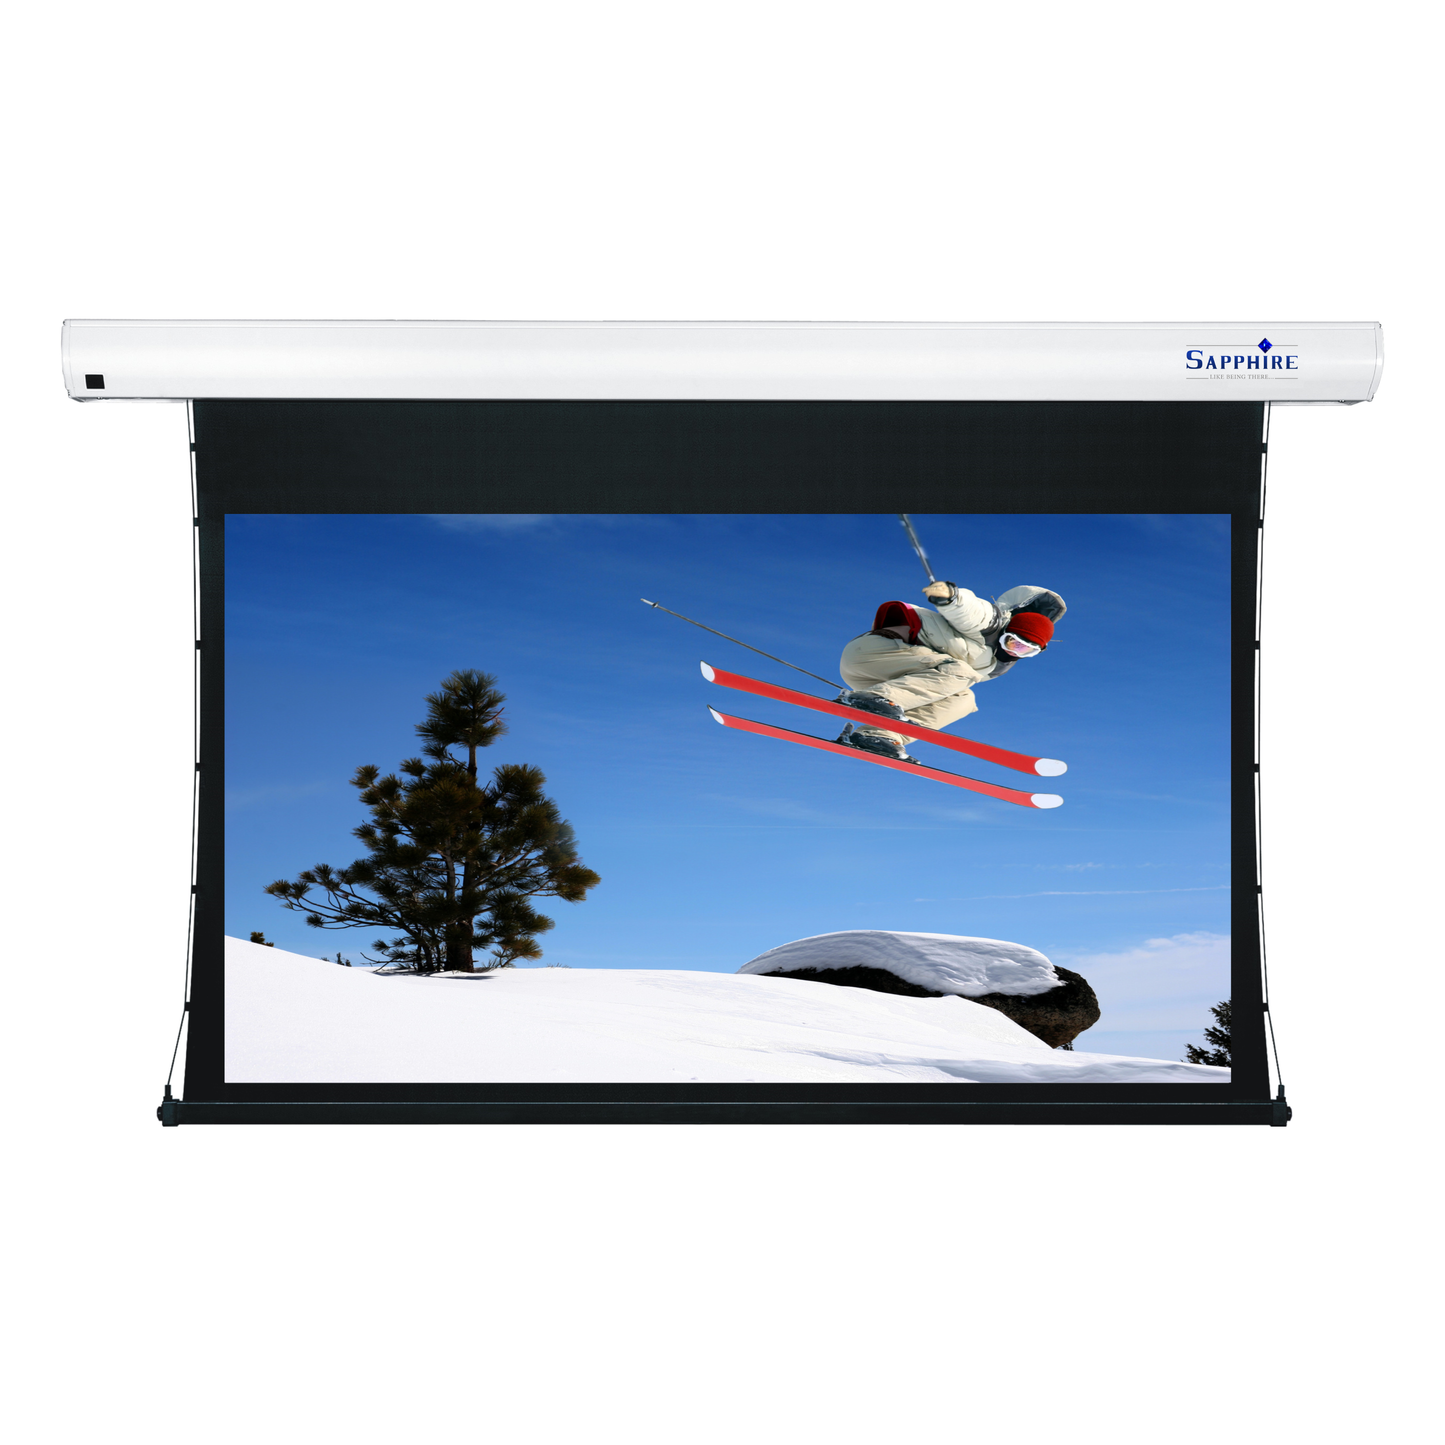 Sapphire Tab Tension Electric Infra Red 16:9 Format Screen Viewing Area 3010mm x 1693mm Approx Case Dimensions L 3538mm x H 143mm x D 135mm